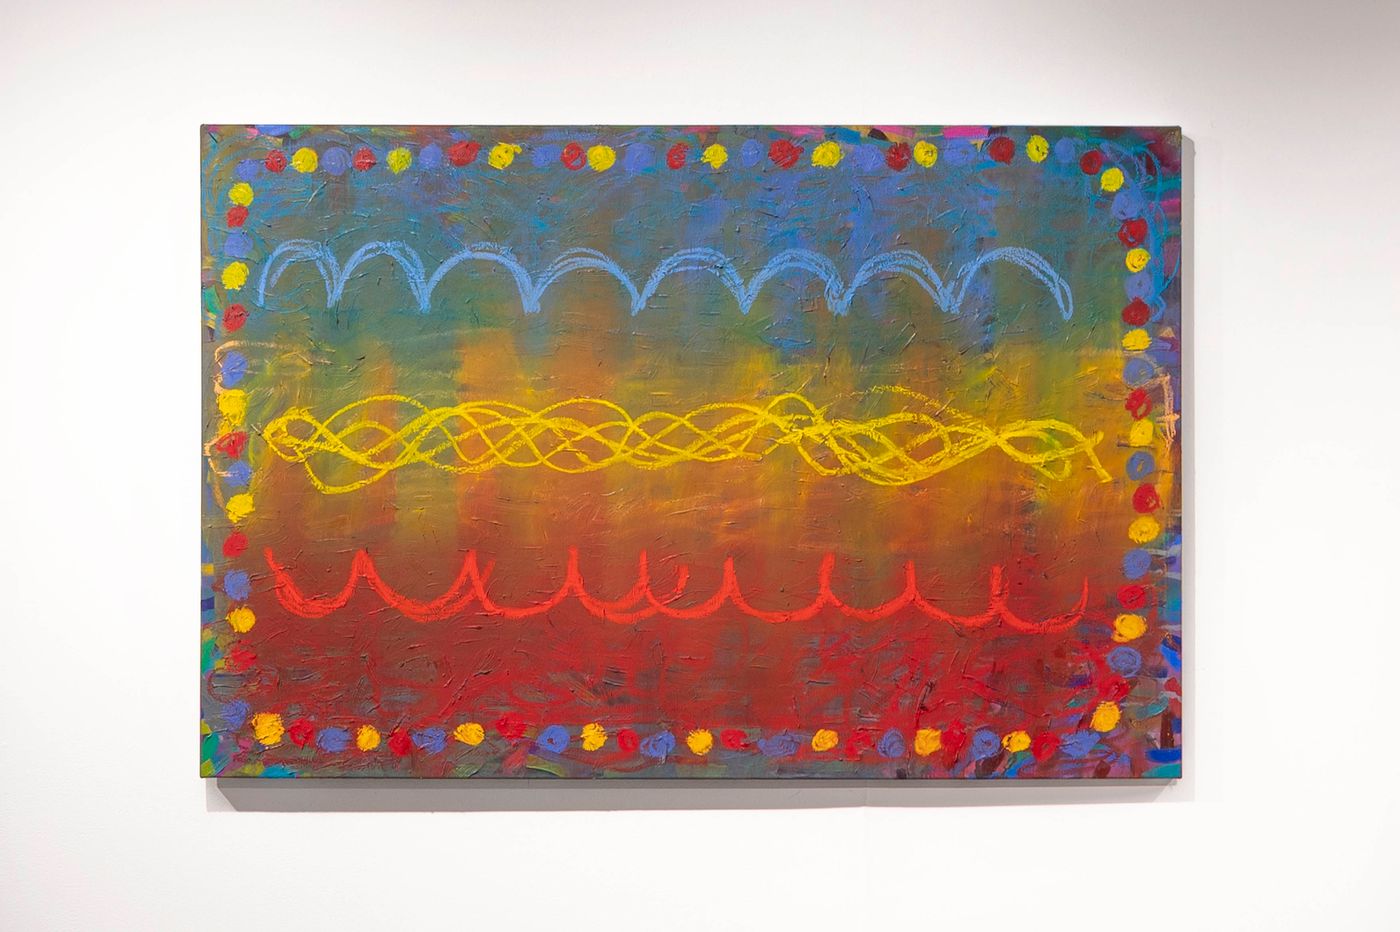 Ecstatic Hum, 2022. Oil on canvas; 48 x 36 in. Photo: Allison Minto.